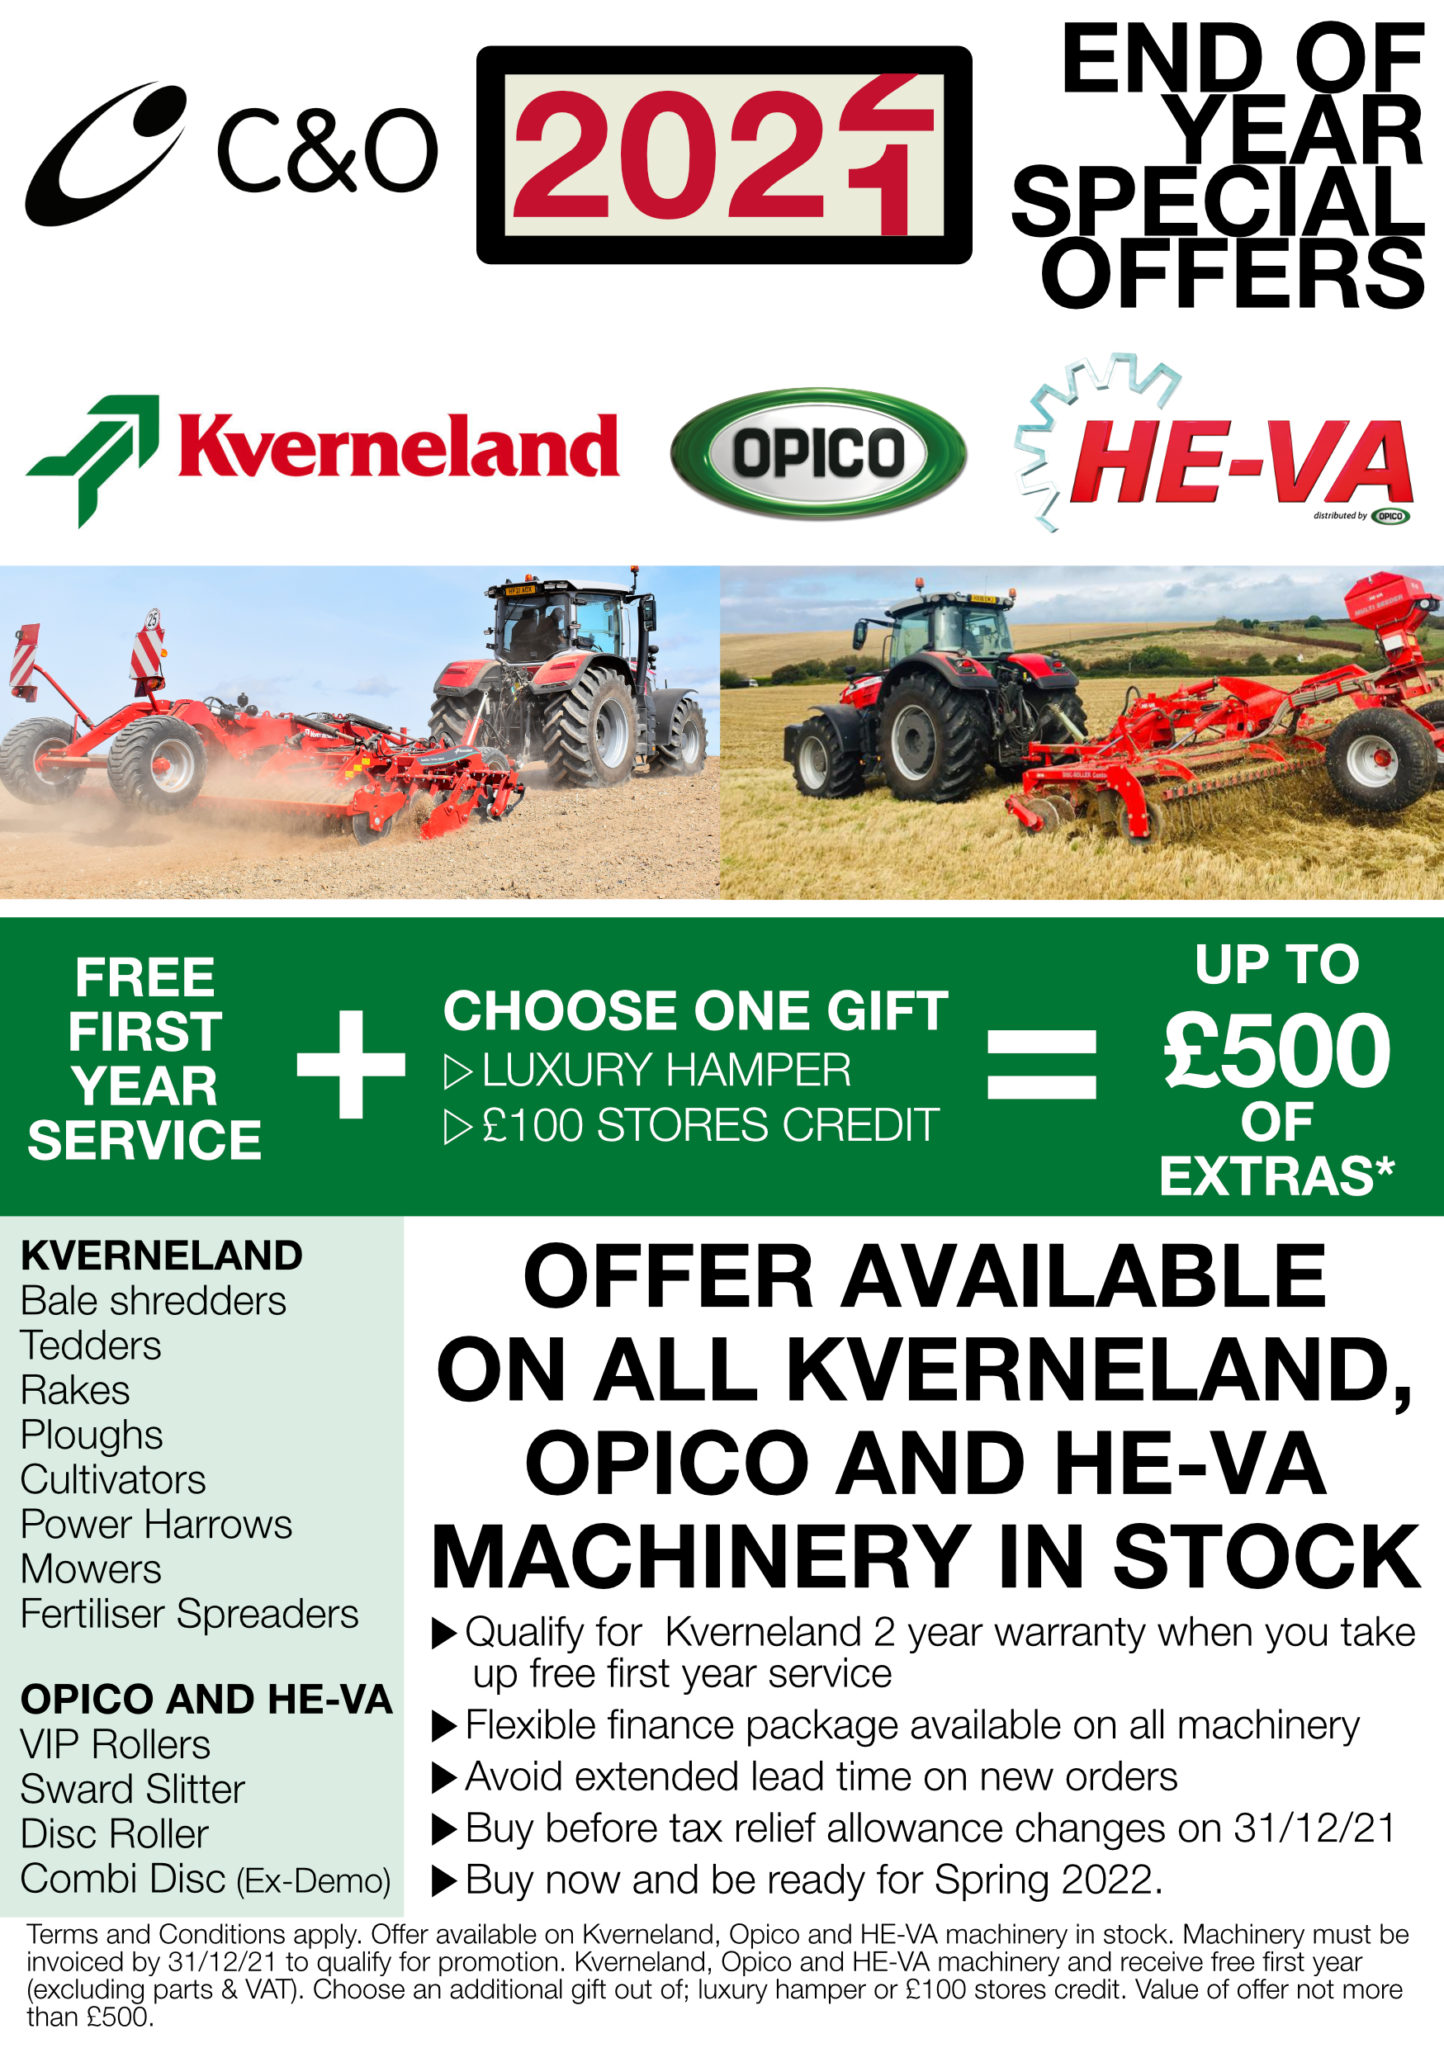 End of Year Special Offers on Kverneland, Opico & HE-VA